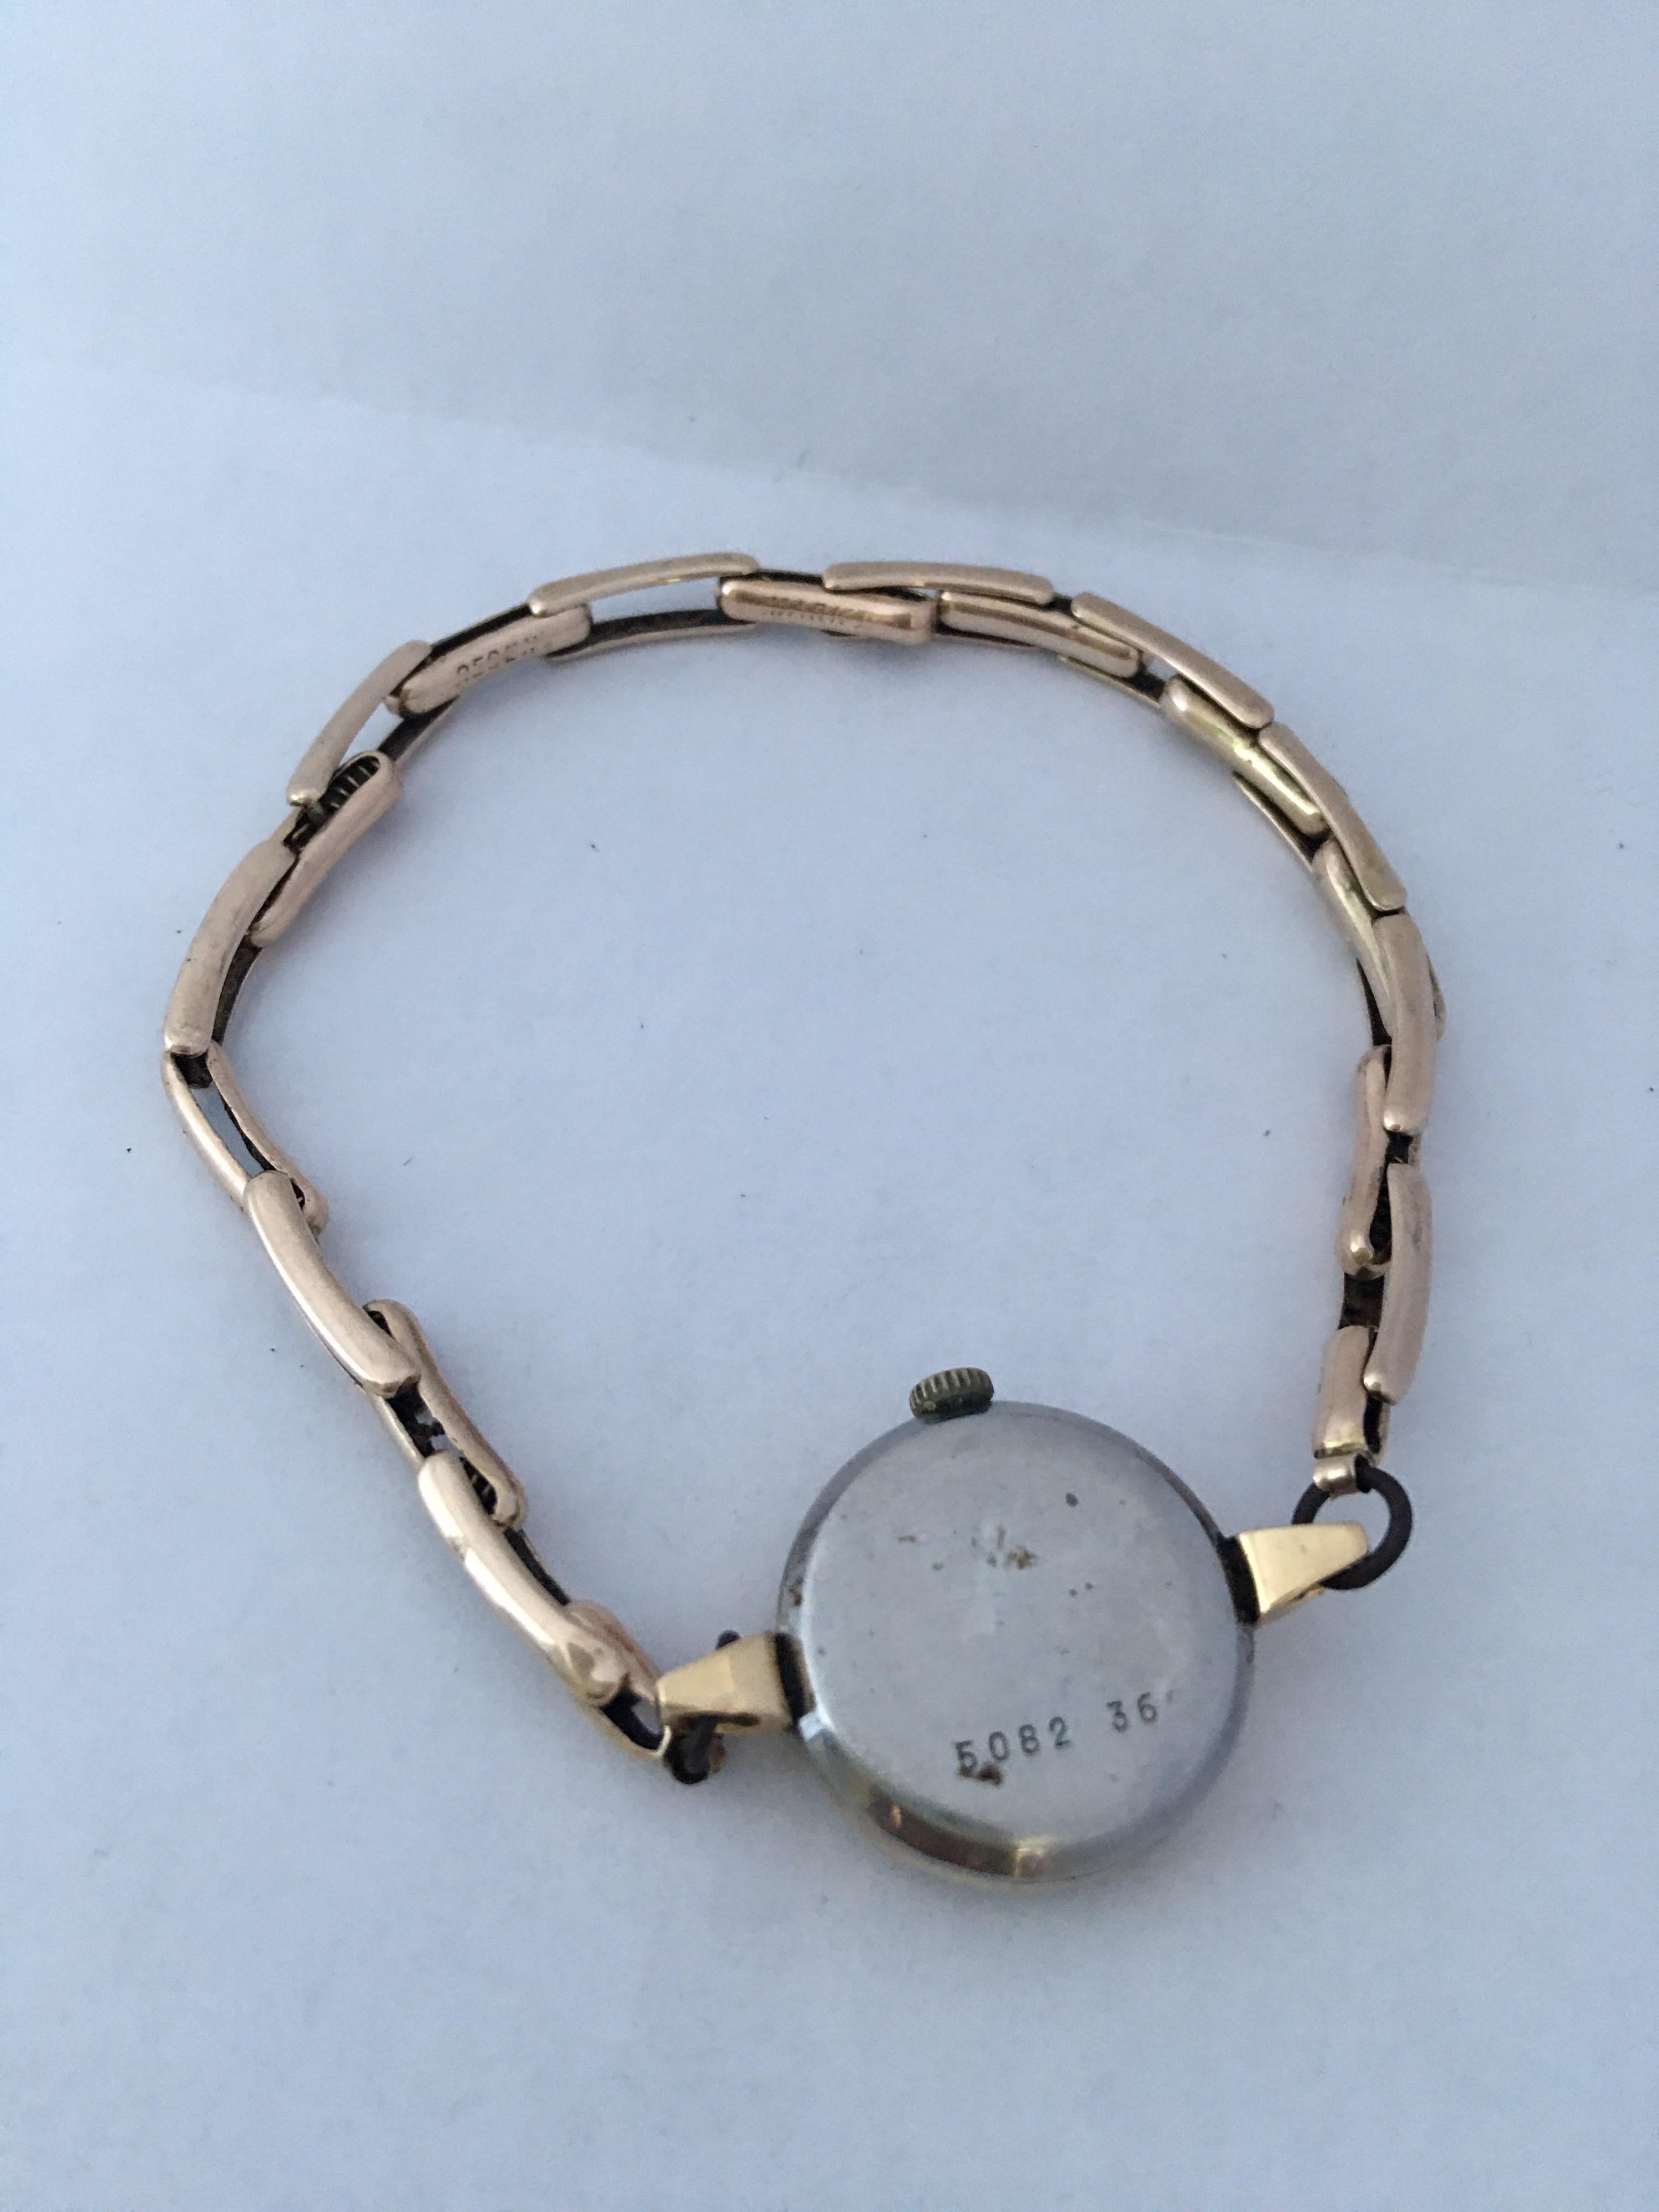 Vintage 1960s Ladies Gold-Filled Mechanical Watch For Sale 5